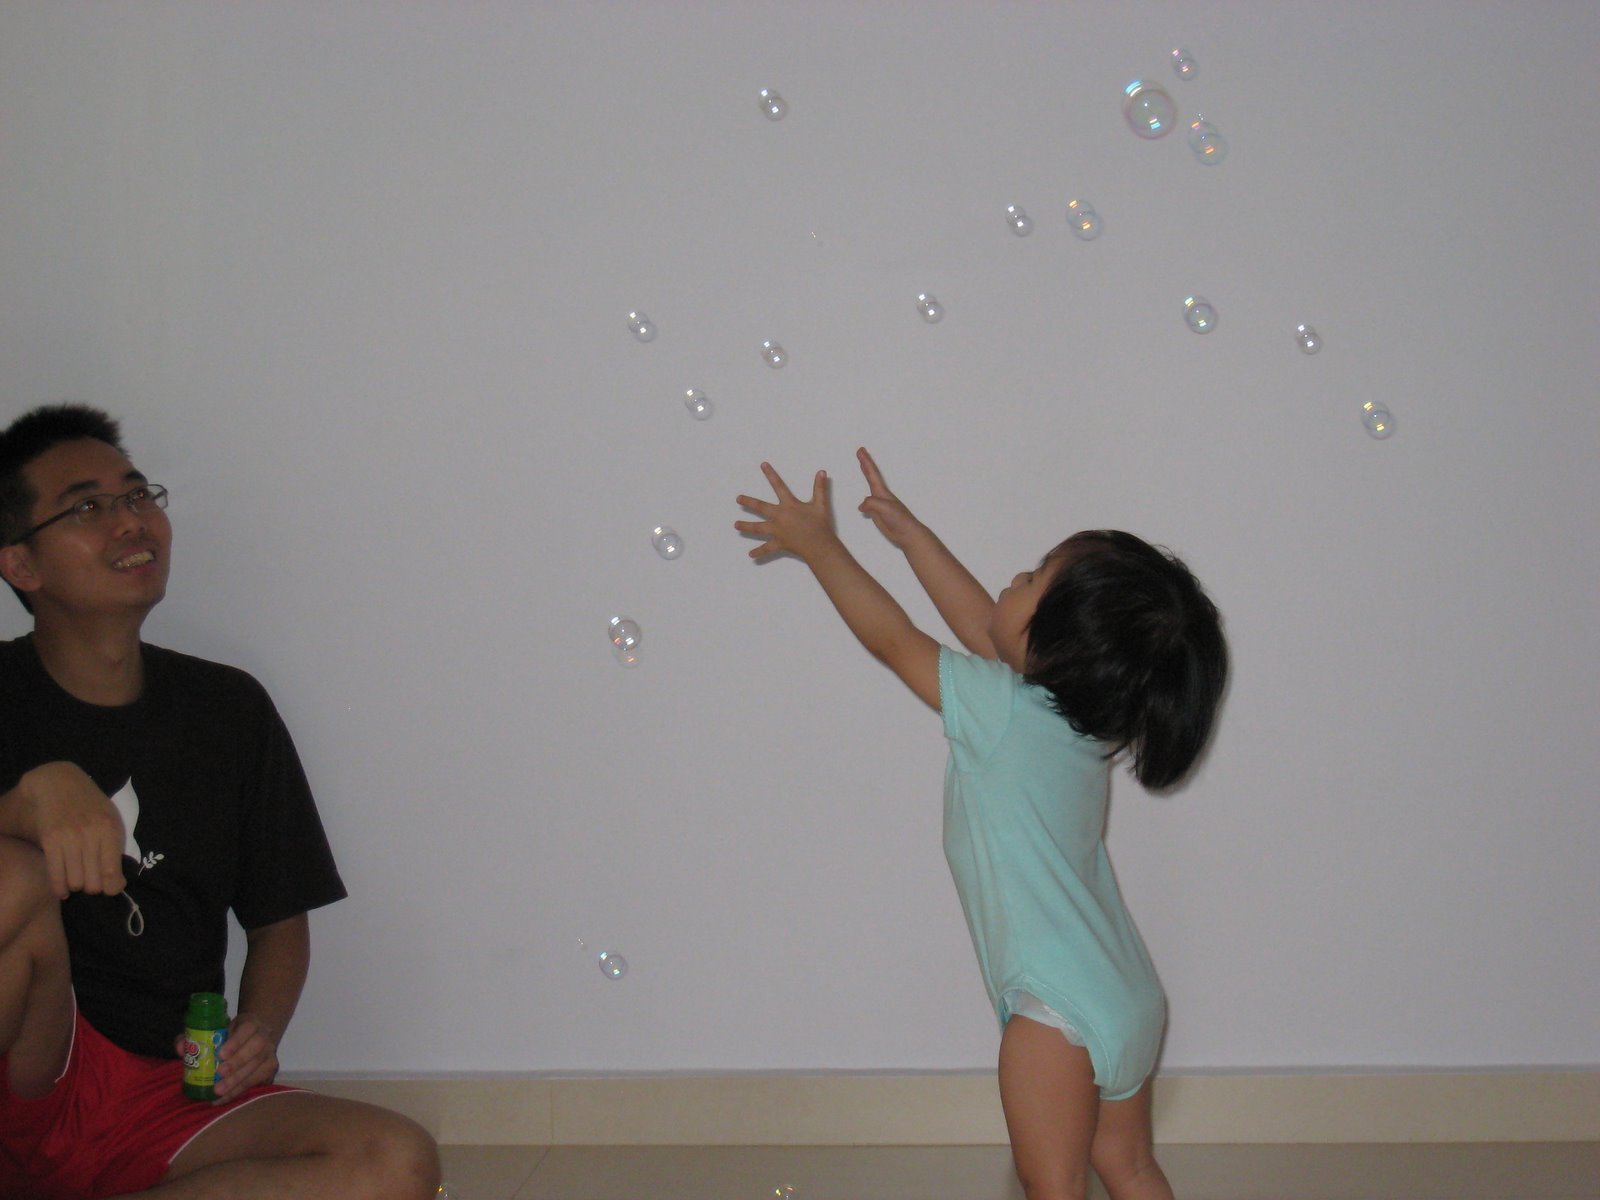 [I+love+playing+with+bubbles.JPG]